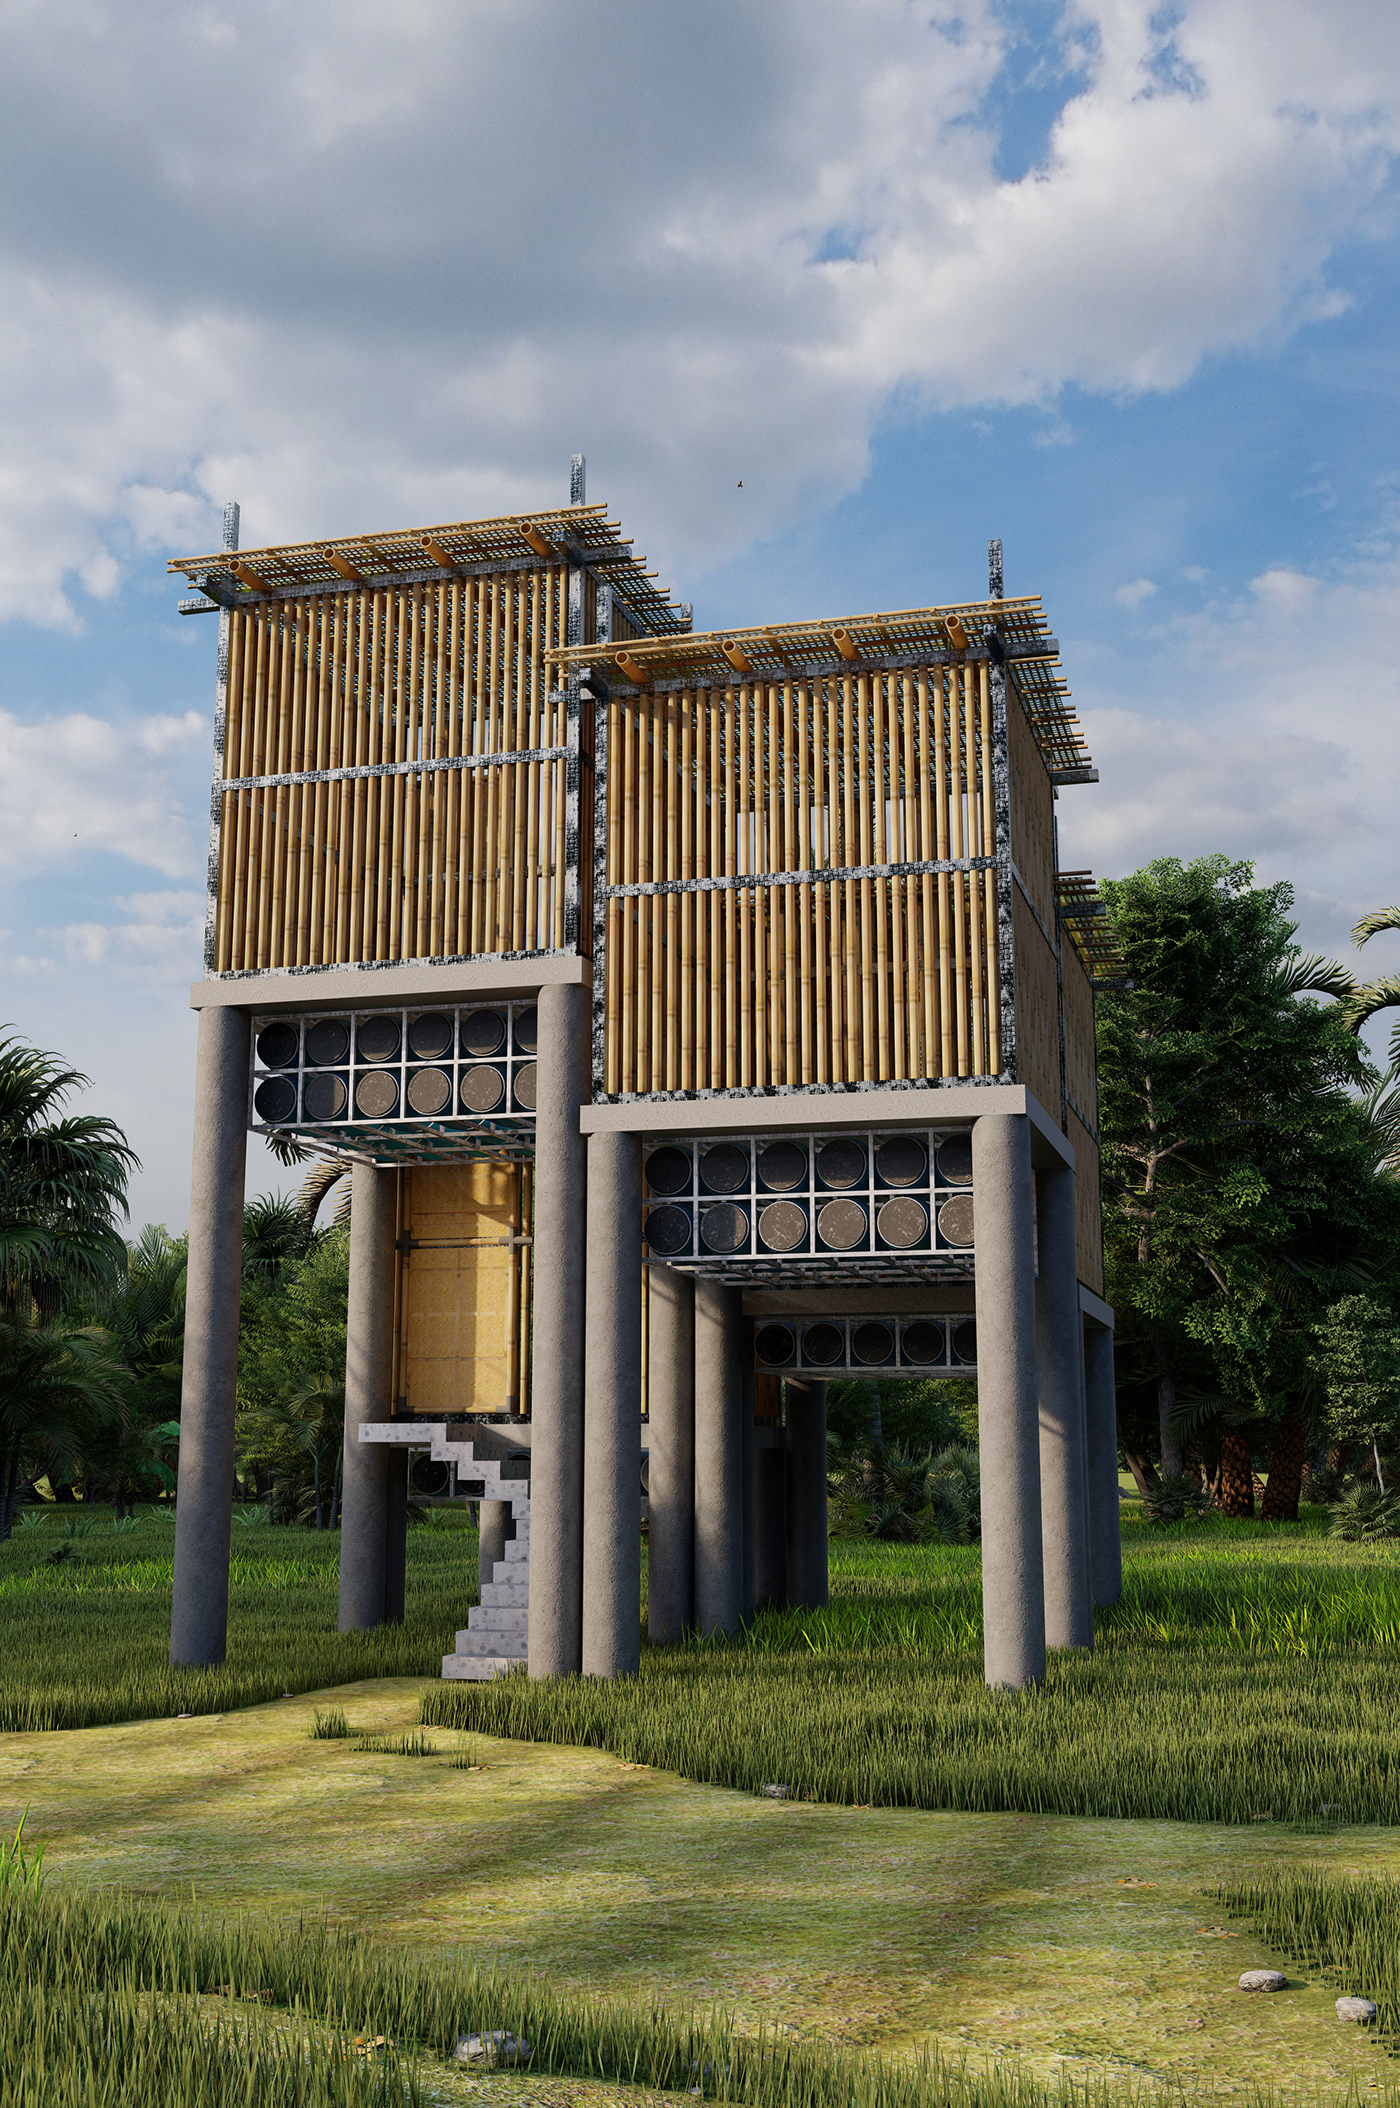 architecture bamboo architecture disater Floodproof house lowcost sutainable